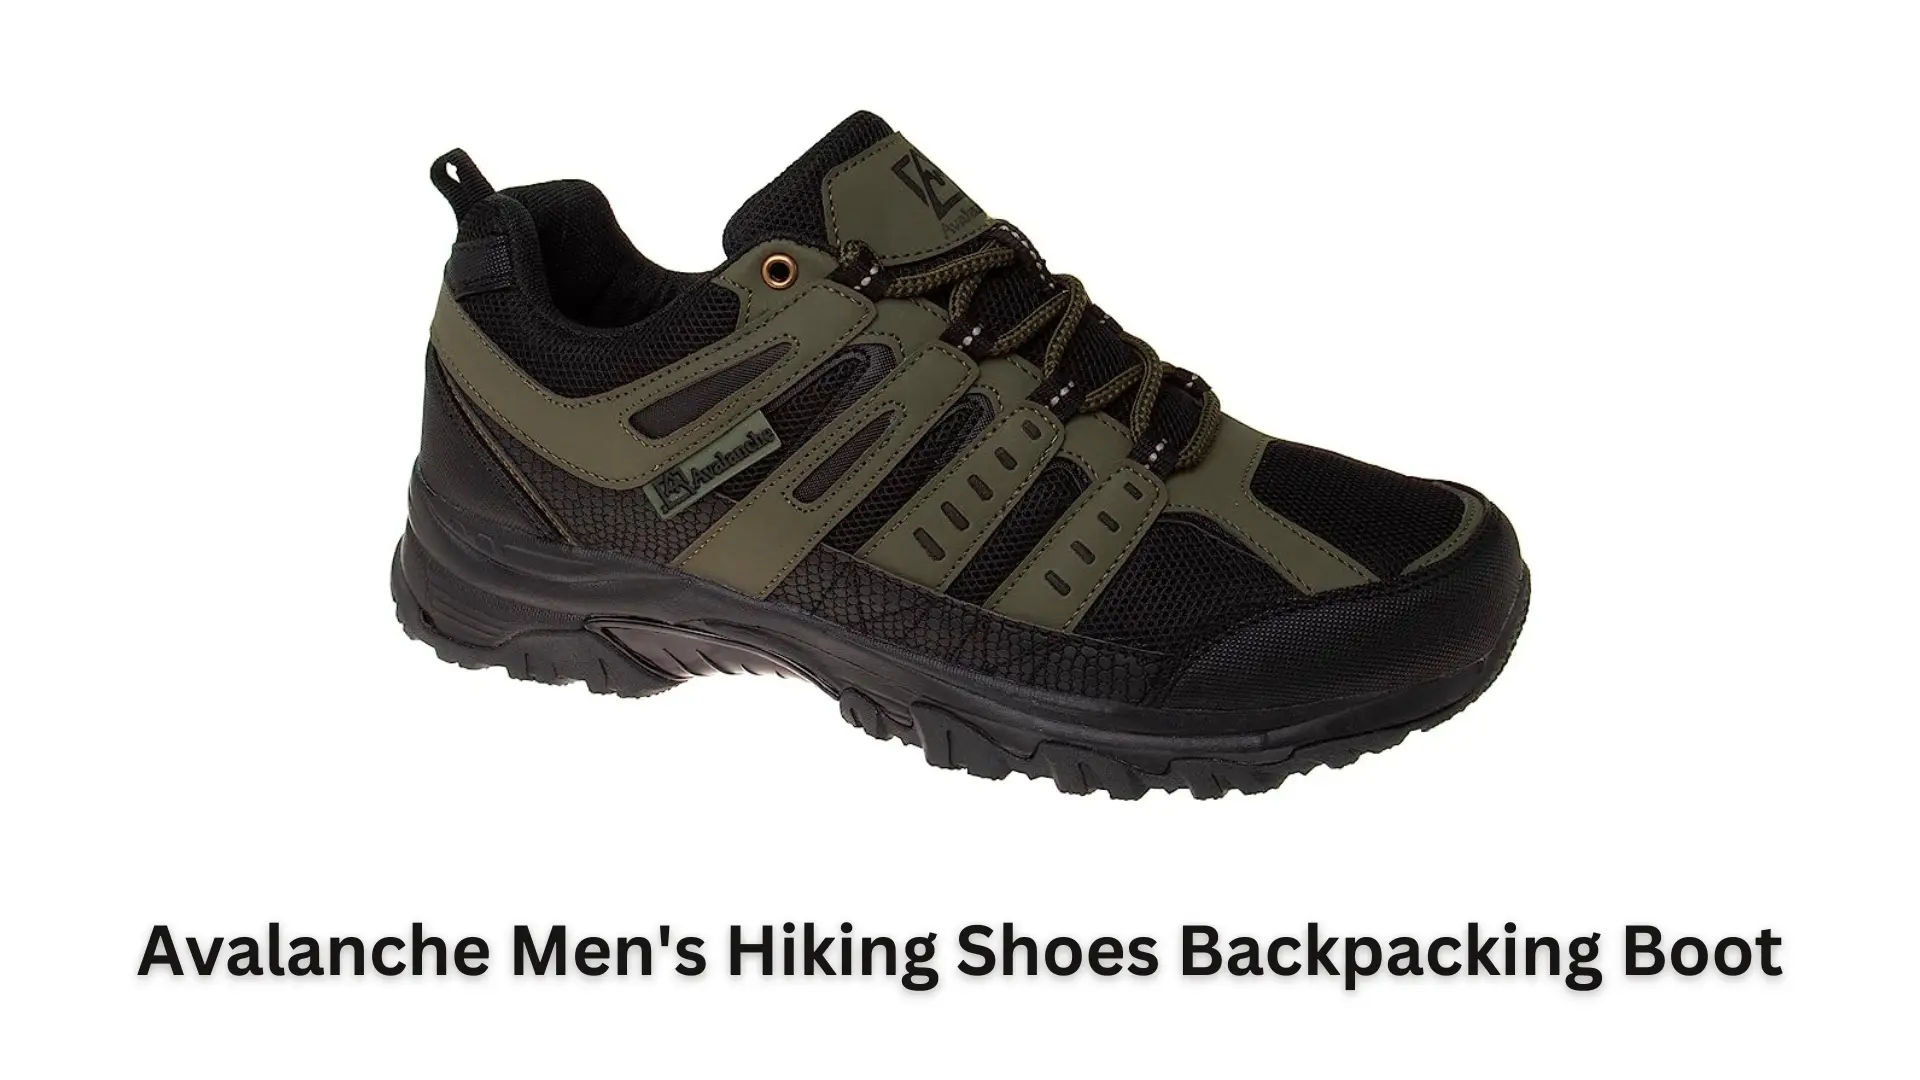 Avalanche Men's Hiking Shoes Backpacking Boot Image